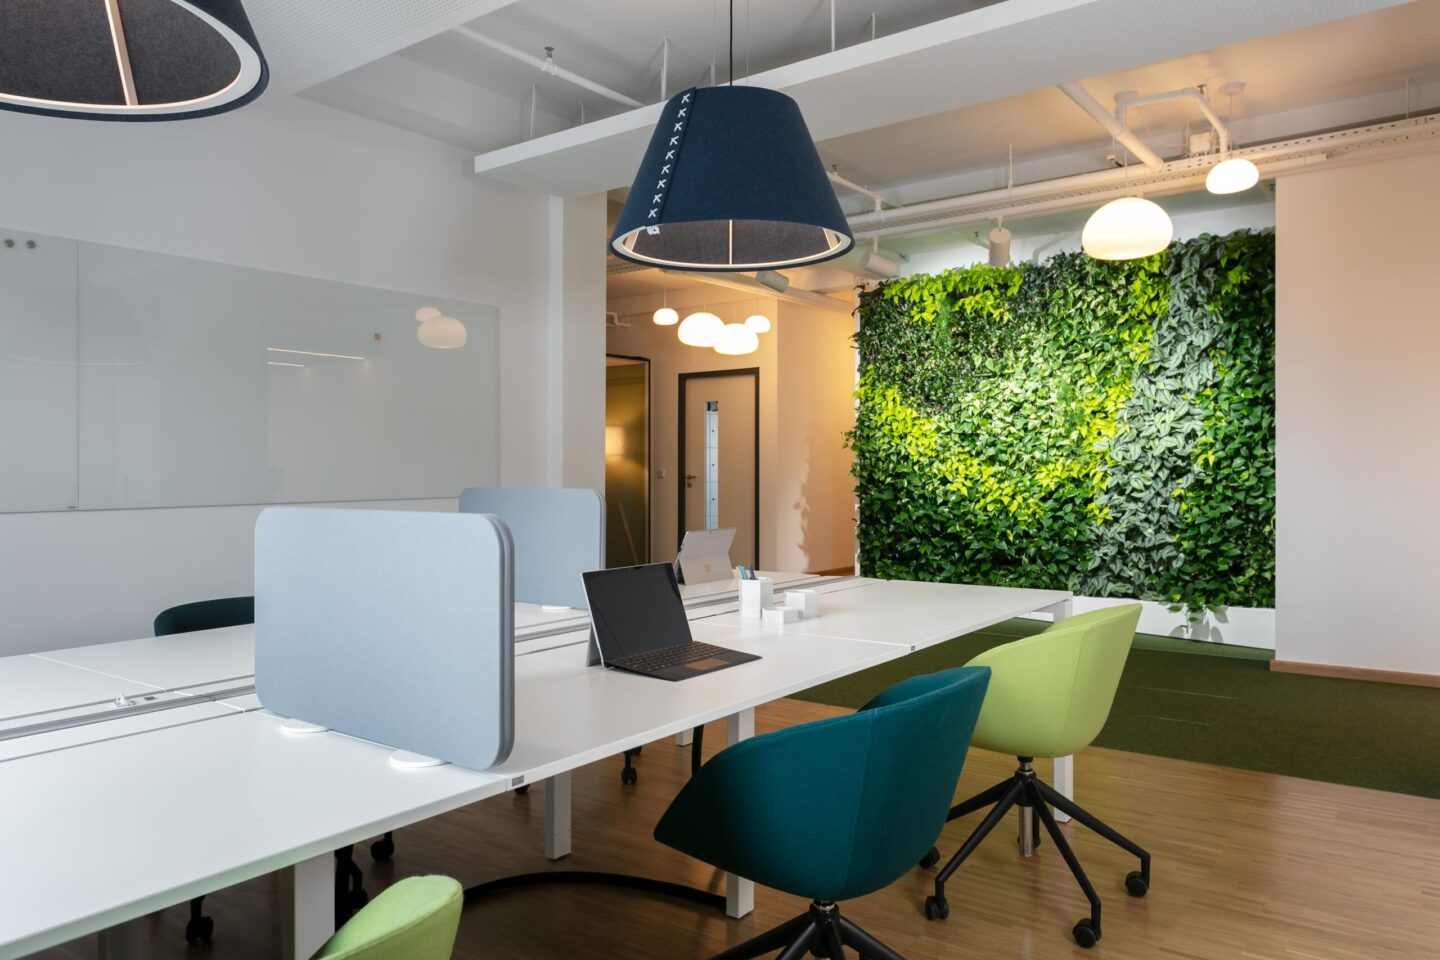 bmp-greengas │ modern working environments │ sustainability and quality